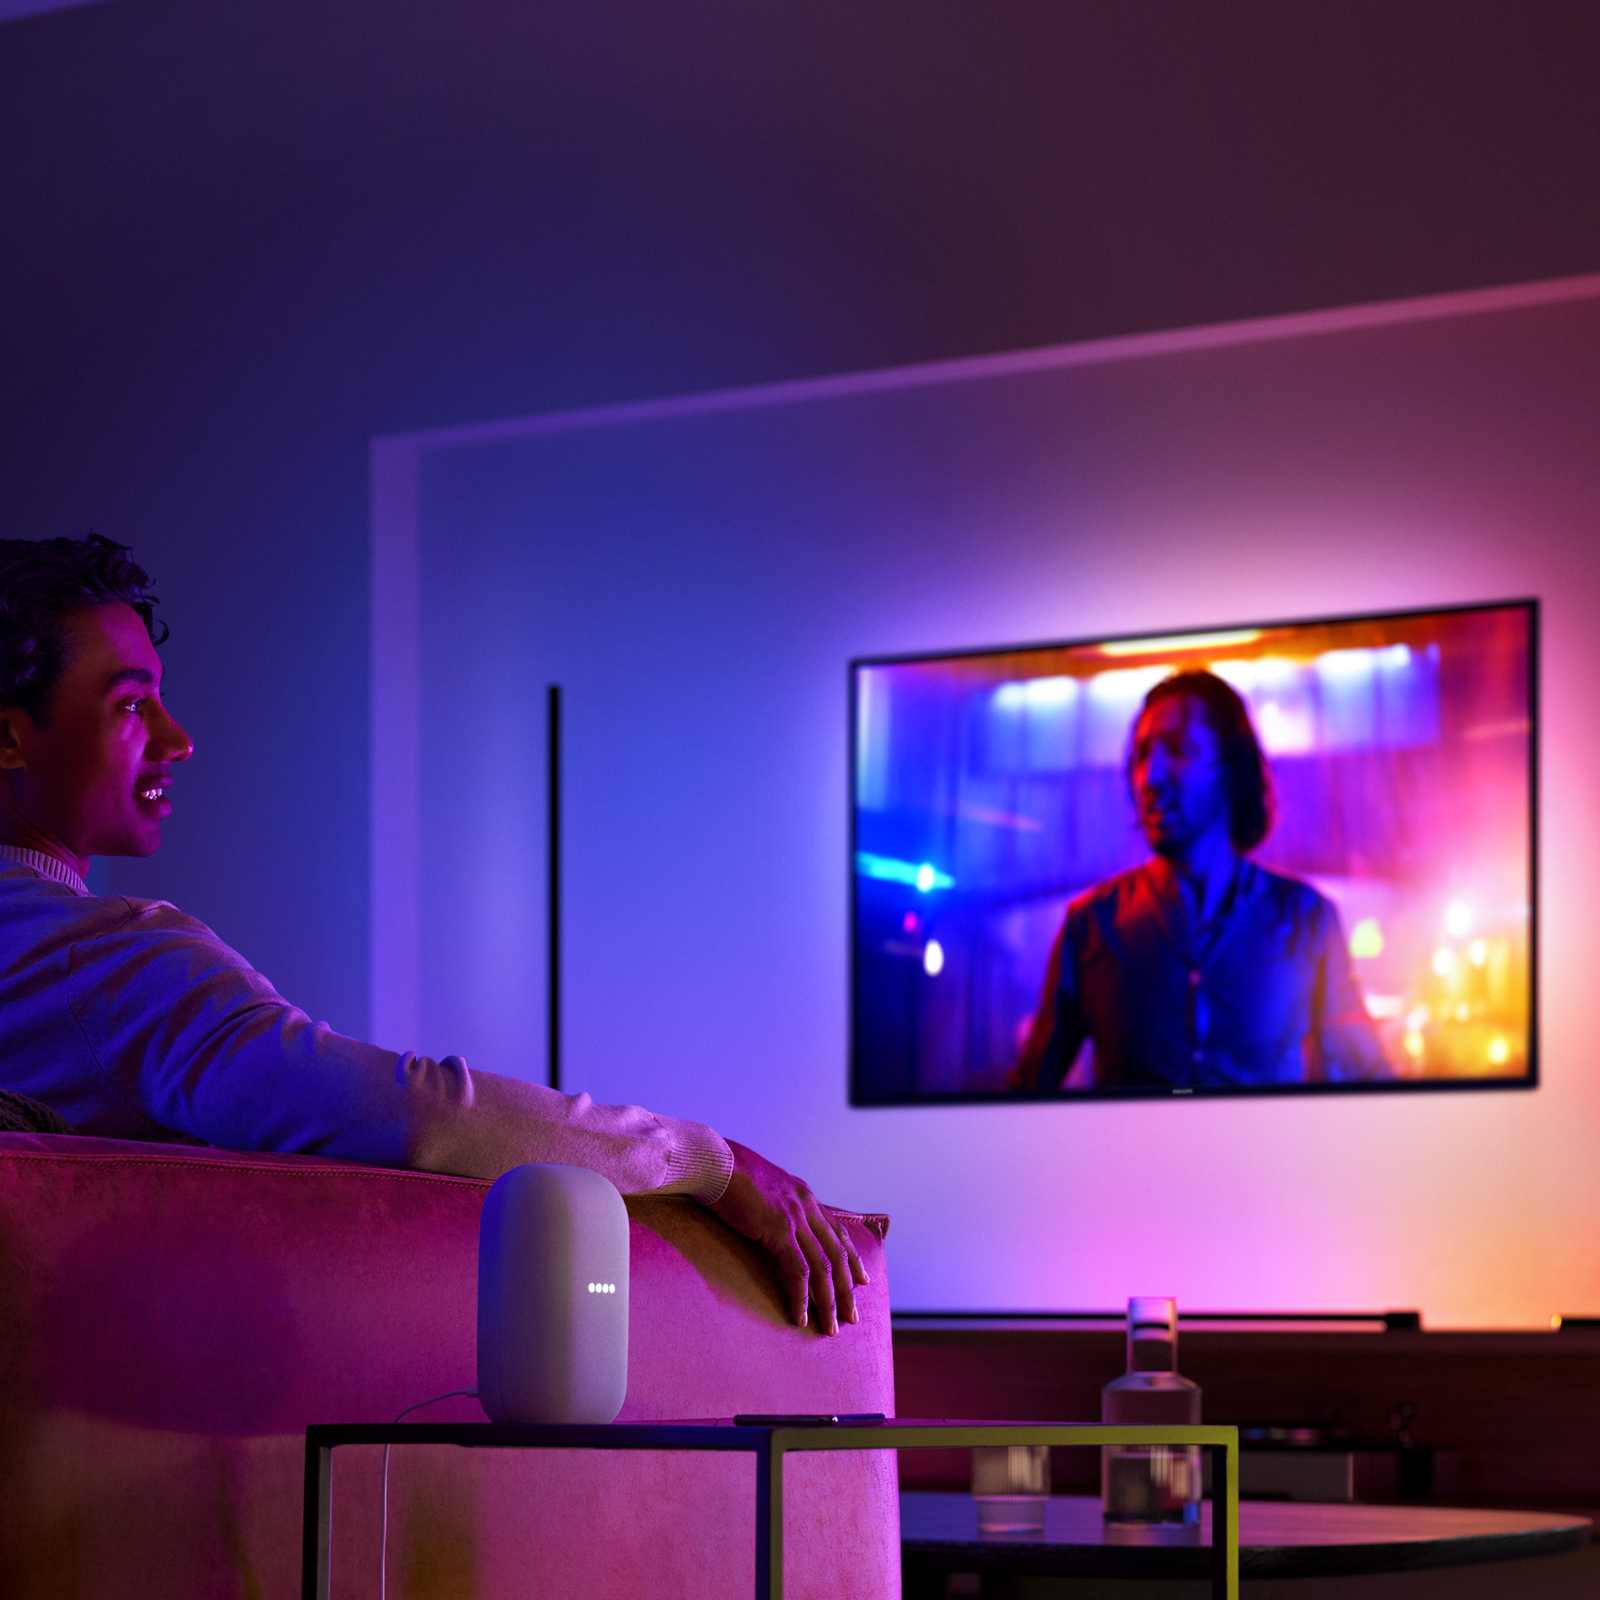 Philips Hue Gradient Ambiance Lightstrip 2m alap